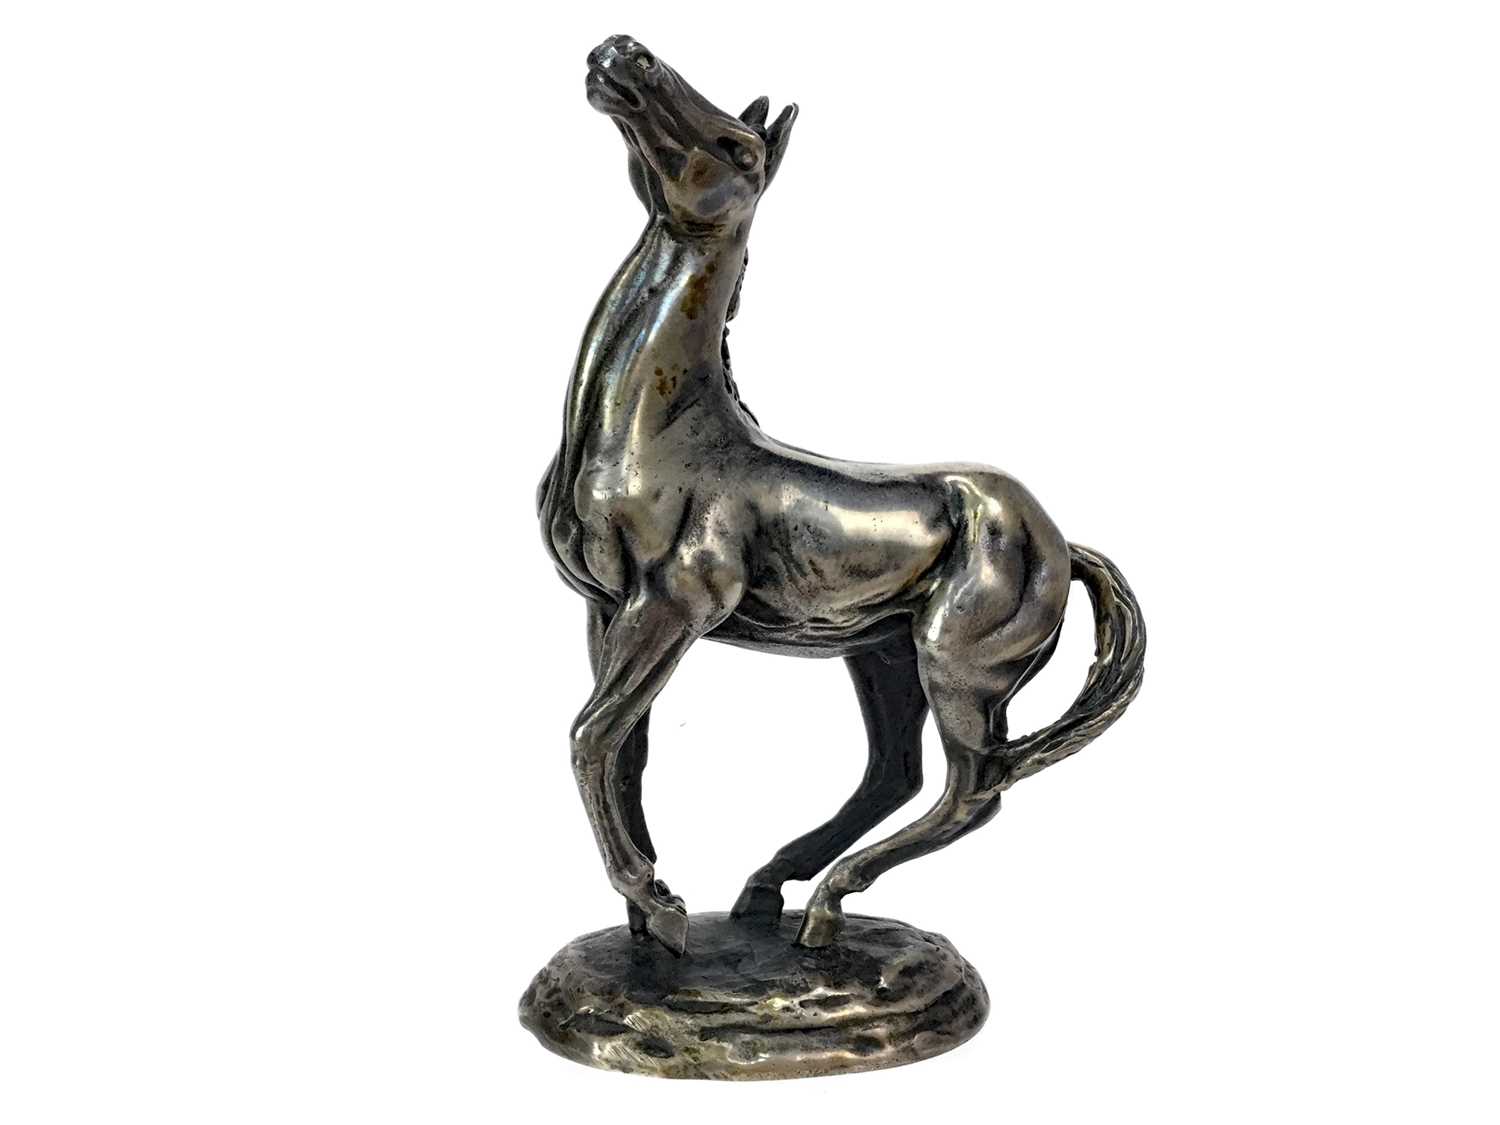 Lot 495 - 'PLAYING UP' - A SOLID SILVER FIGURE OF A STALLION